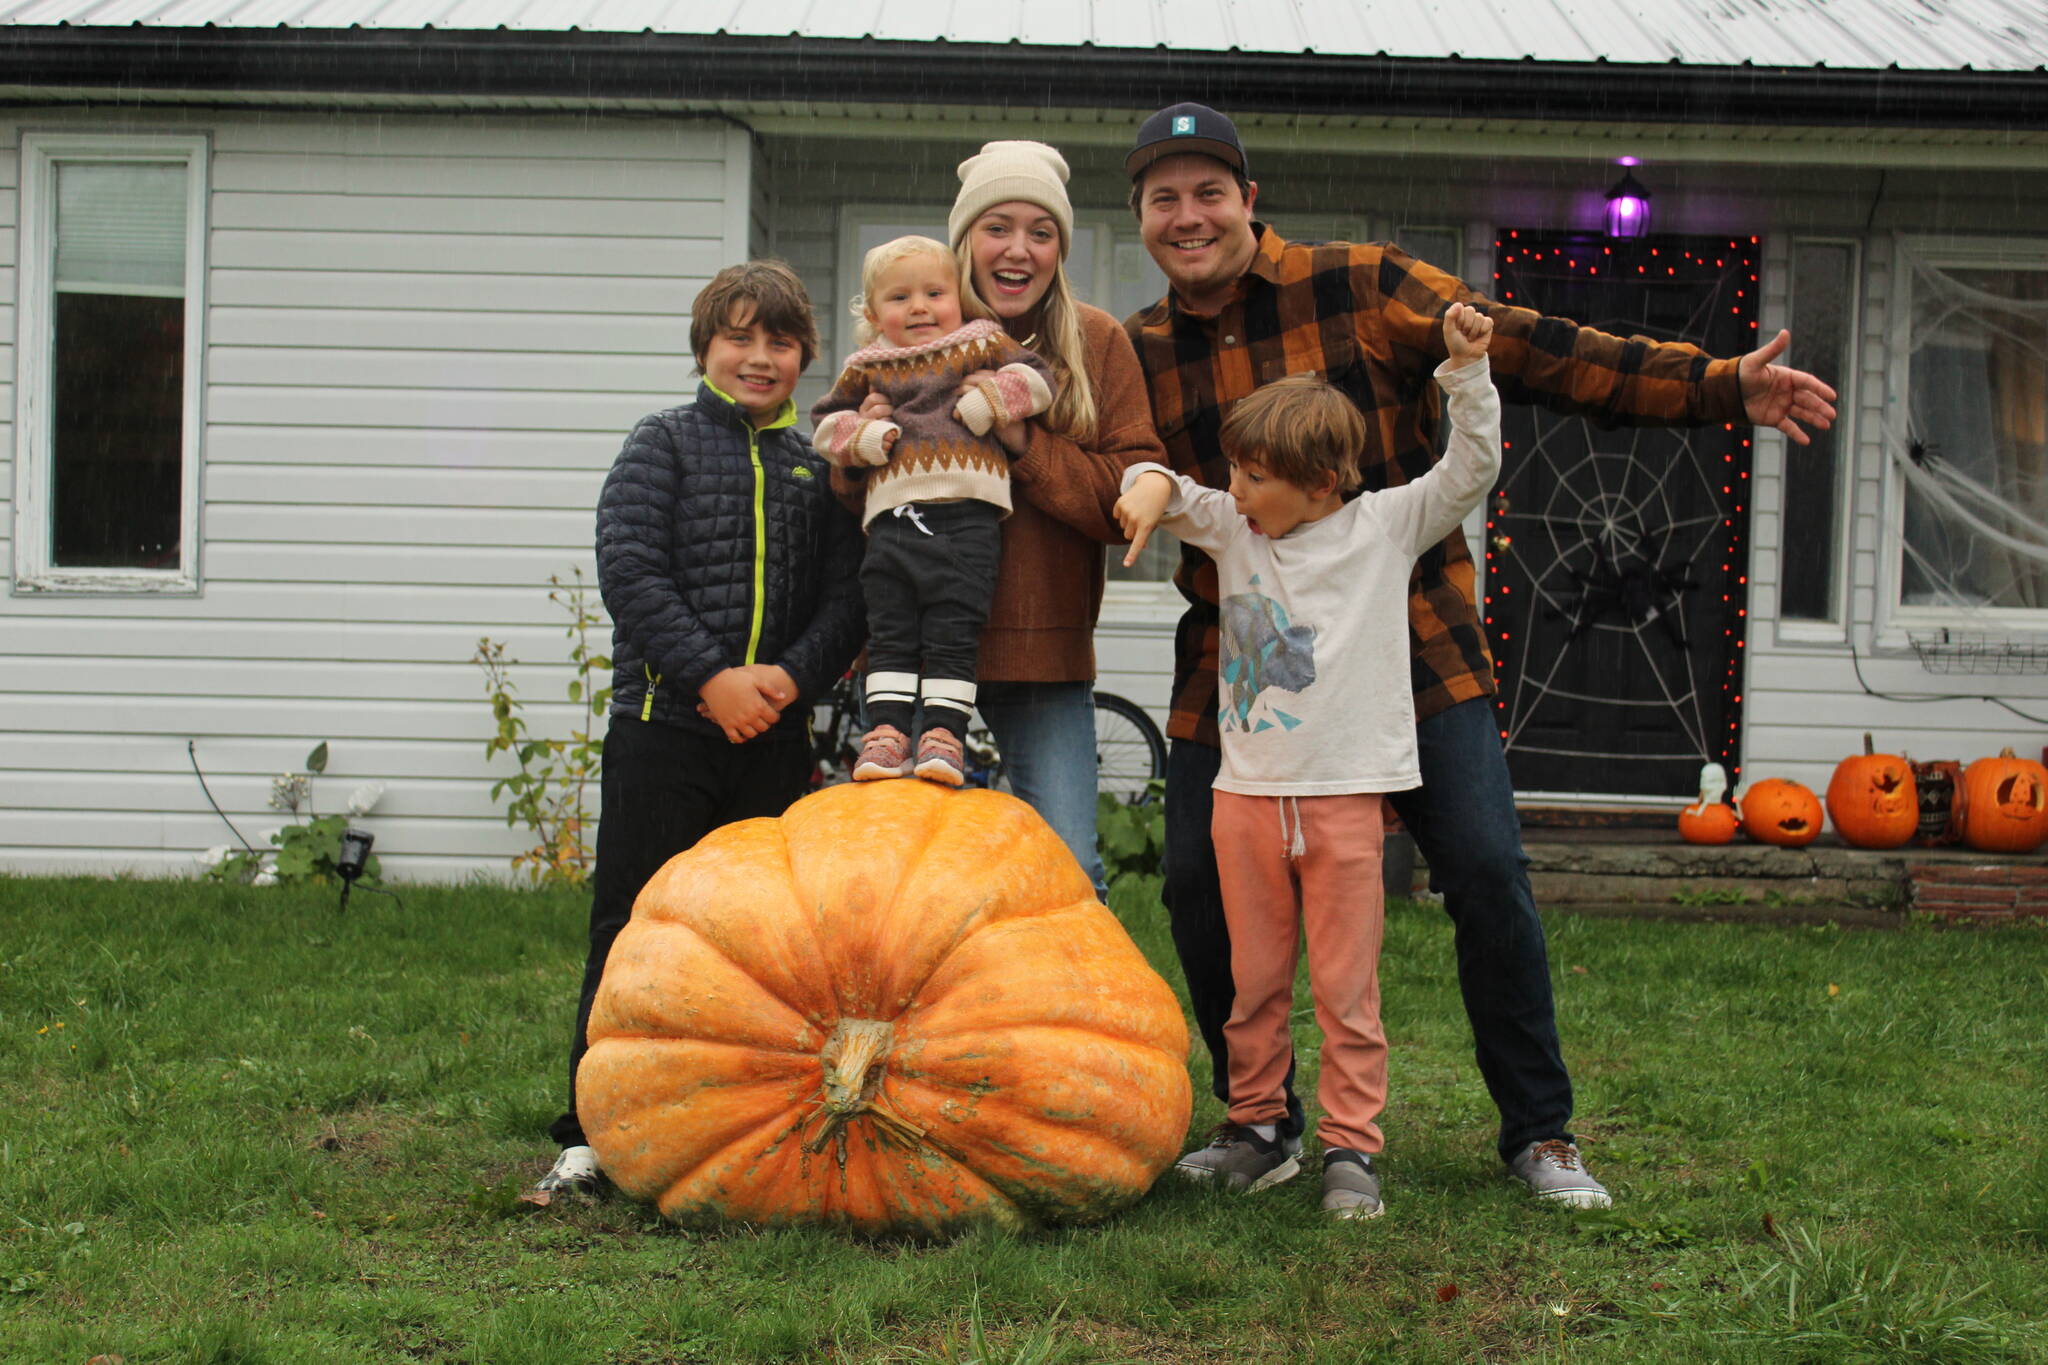 Courtnie Deckwa, James Cardinal and their children, Aiden, 10, Matilda, 1, and Kai, 6, pose with their prize. (Photo by Karina Andrew/Whidbey News-Times)